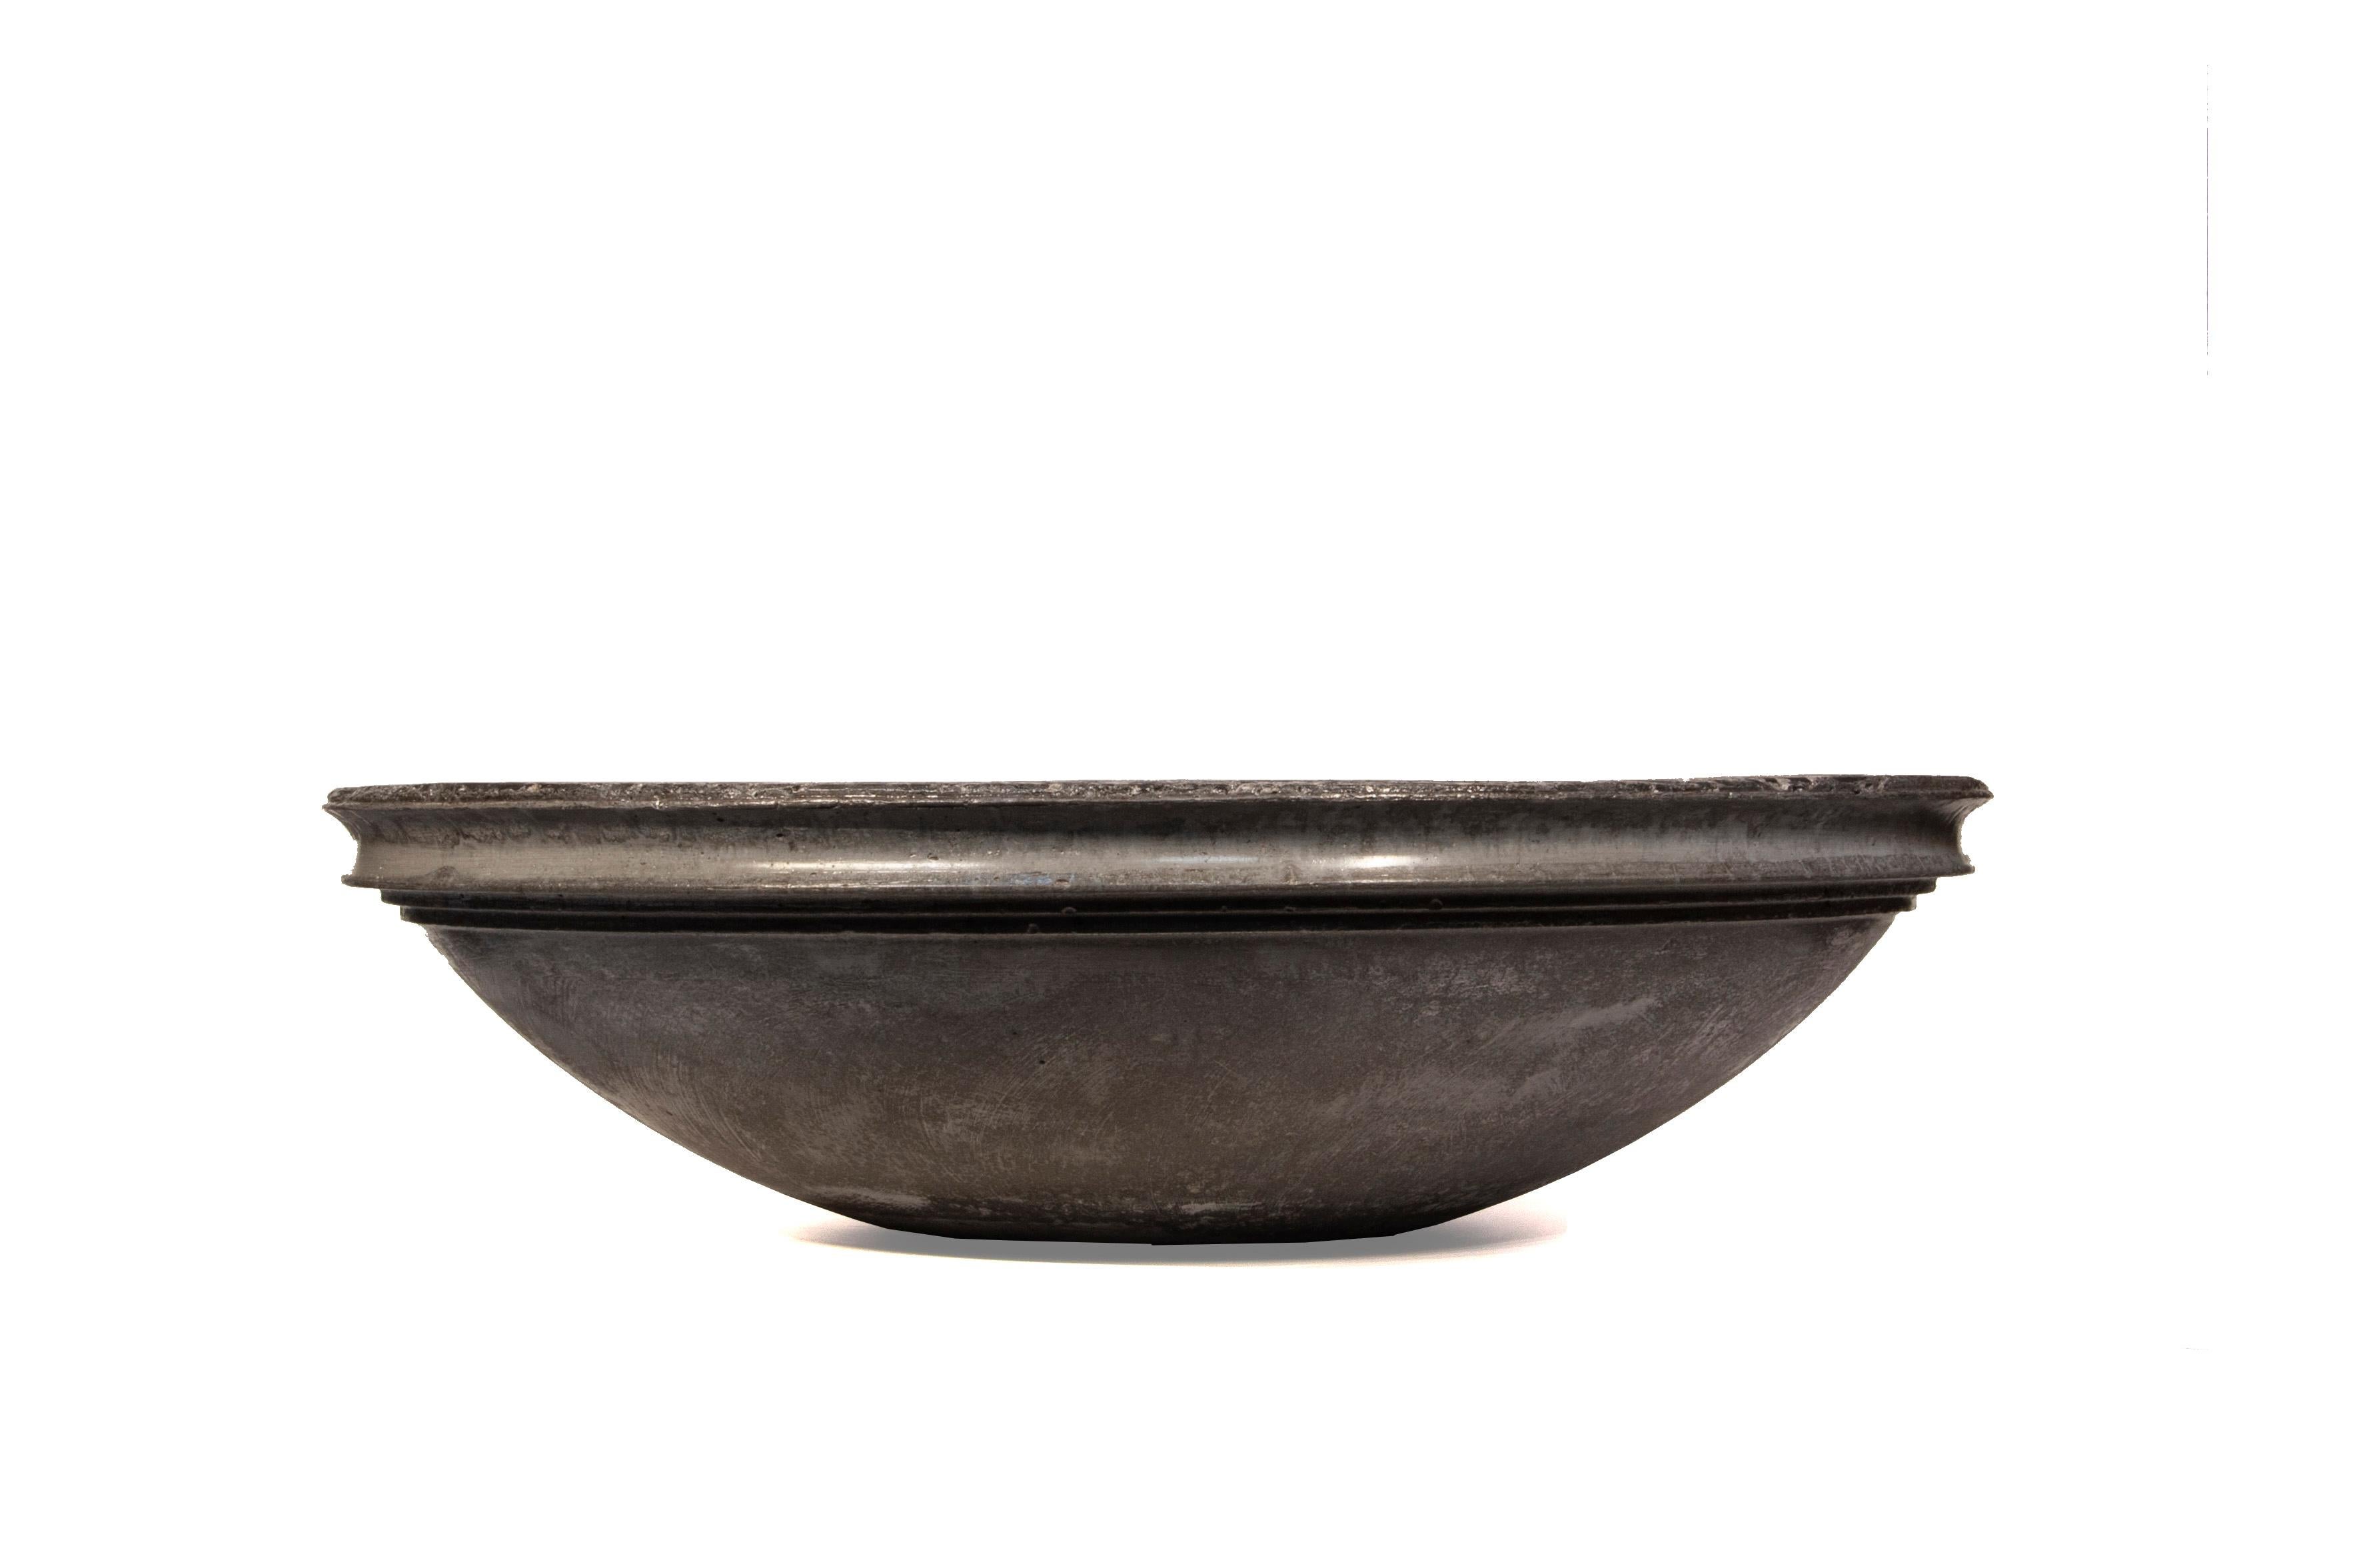 This bowl was made using charcoal and ash from the artist's property in northern California. Every year, fuel reduction in the forest provides fuel for heating his old cabin. The ash is then mixed with concrete, creating a timeless